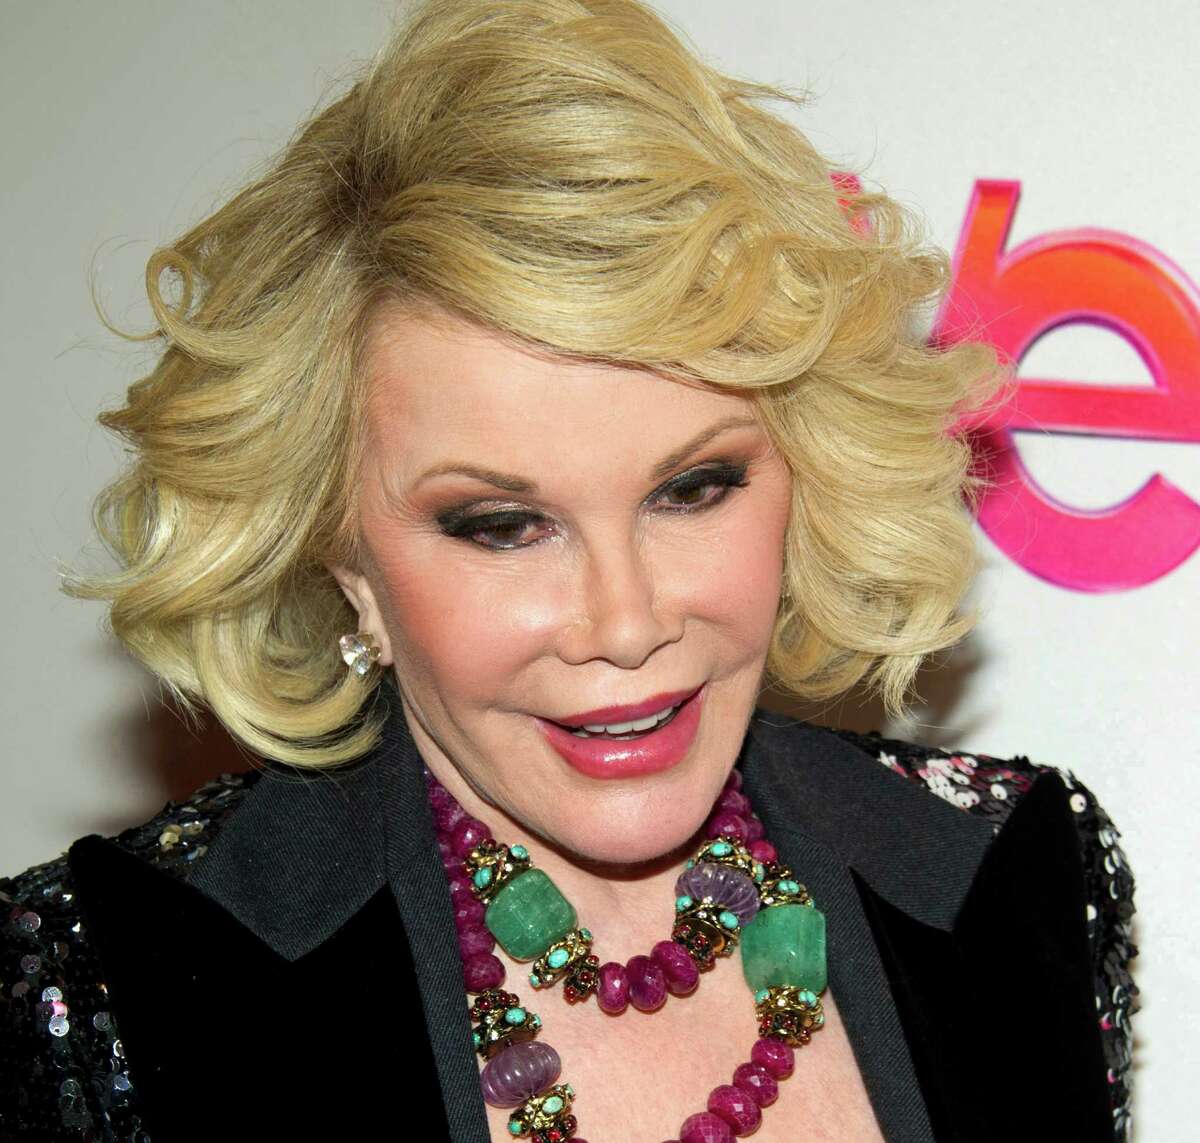 FILE - In this Jan. 19, 2012, file photo, Joan Rivers attends a screening of the Season 2 premiere of WE TV's "Joan & Melissa: Joan Knows Best?" in New York. Two police officials say Rivers has been rushed in cardiac arrest from a doctorâs office to a New York City hospital, Thursday, Aug. 28, 2014. (AP Photo/Charles Sykes, File)